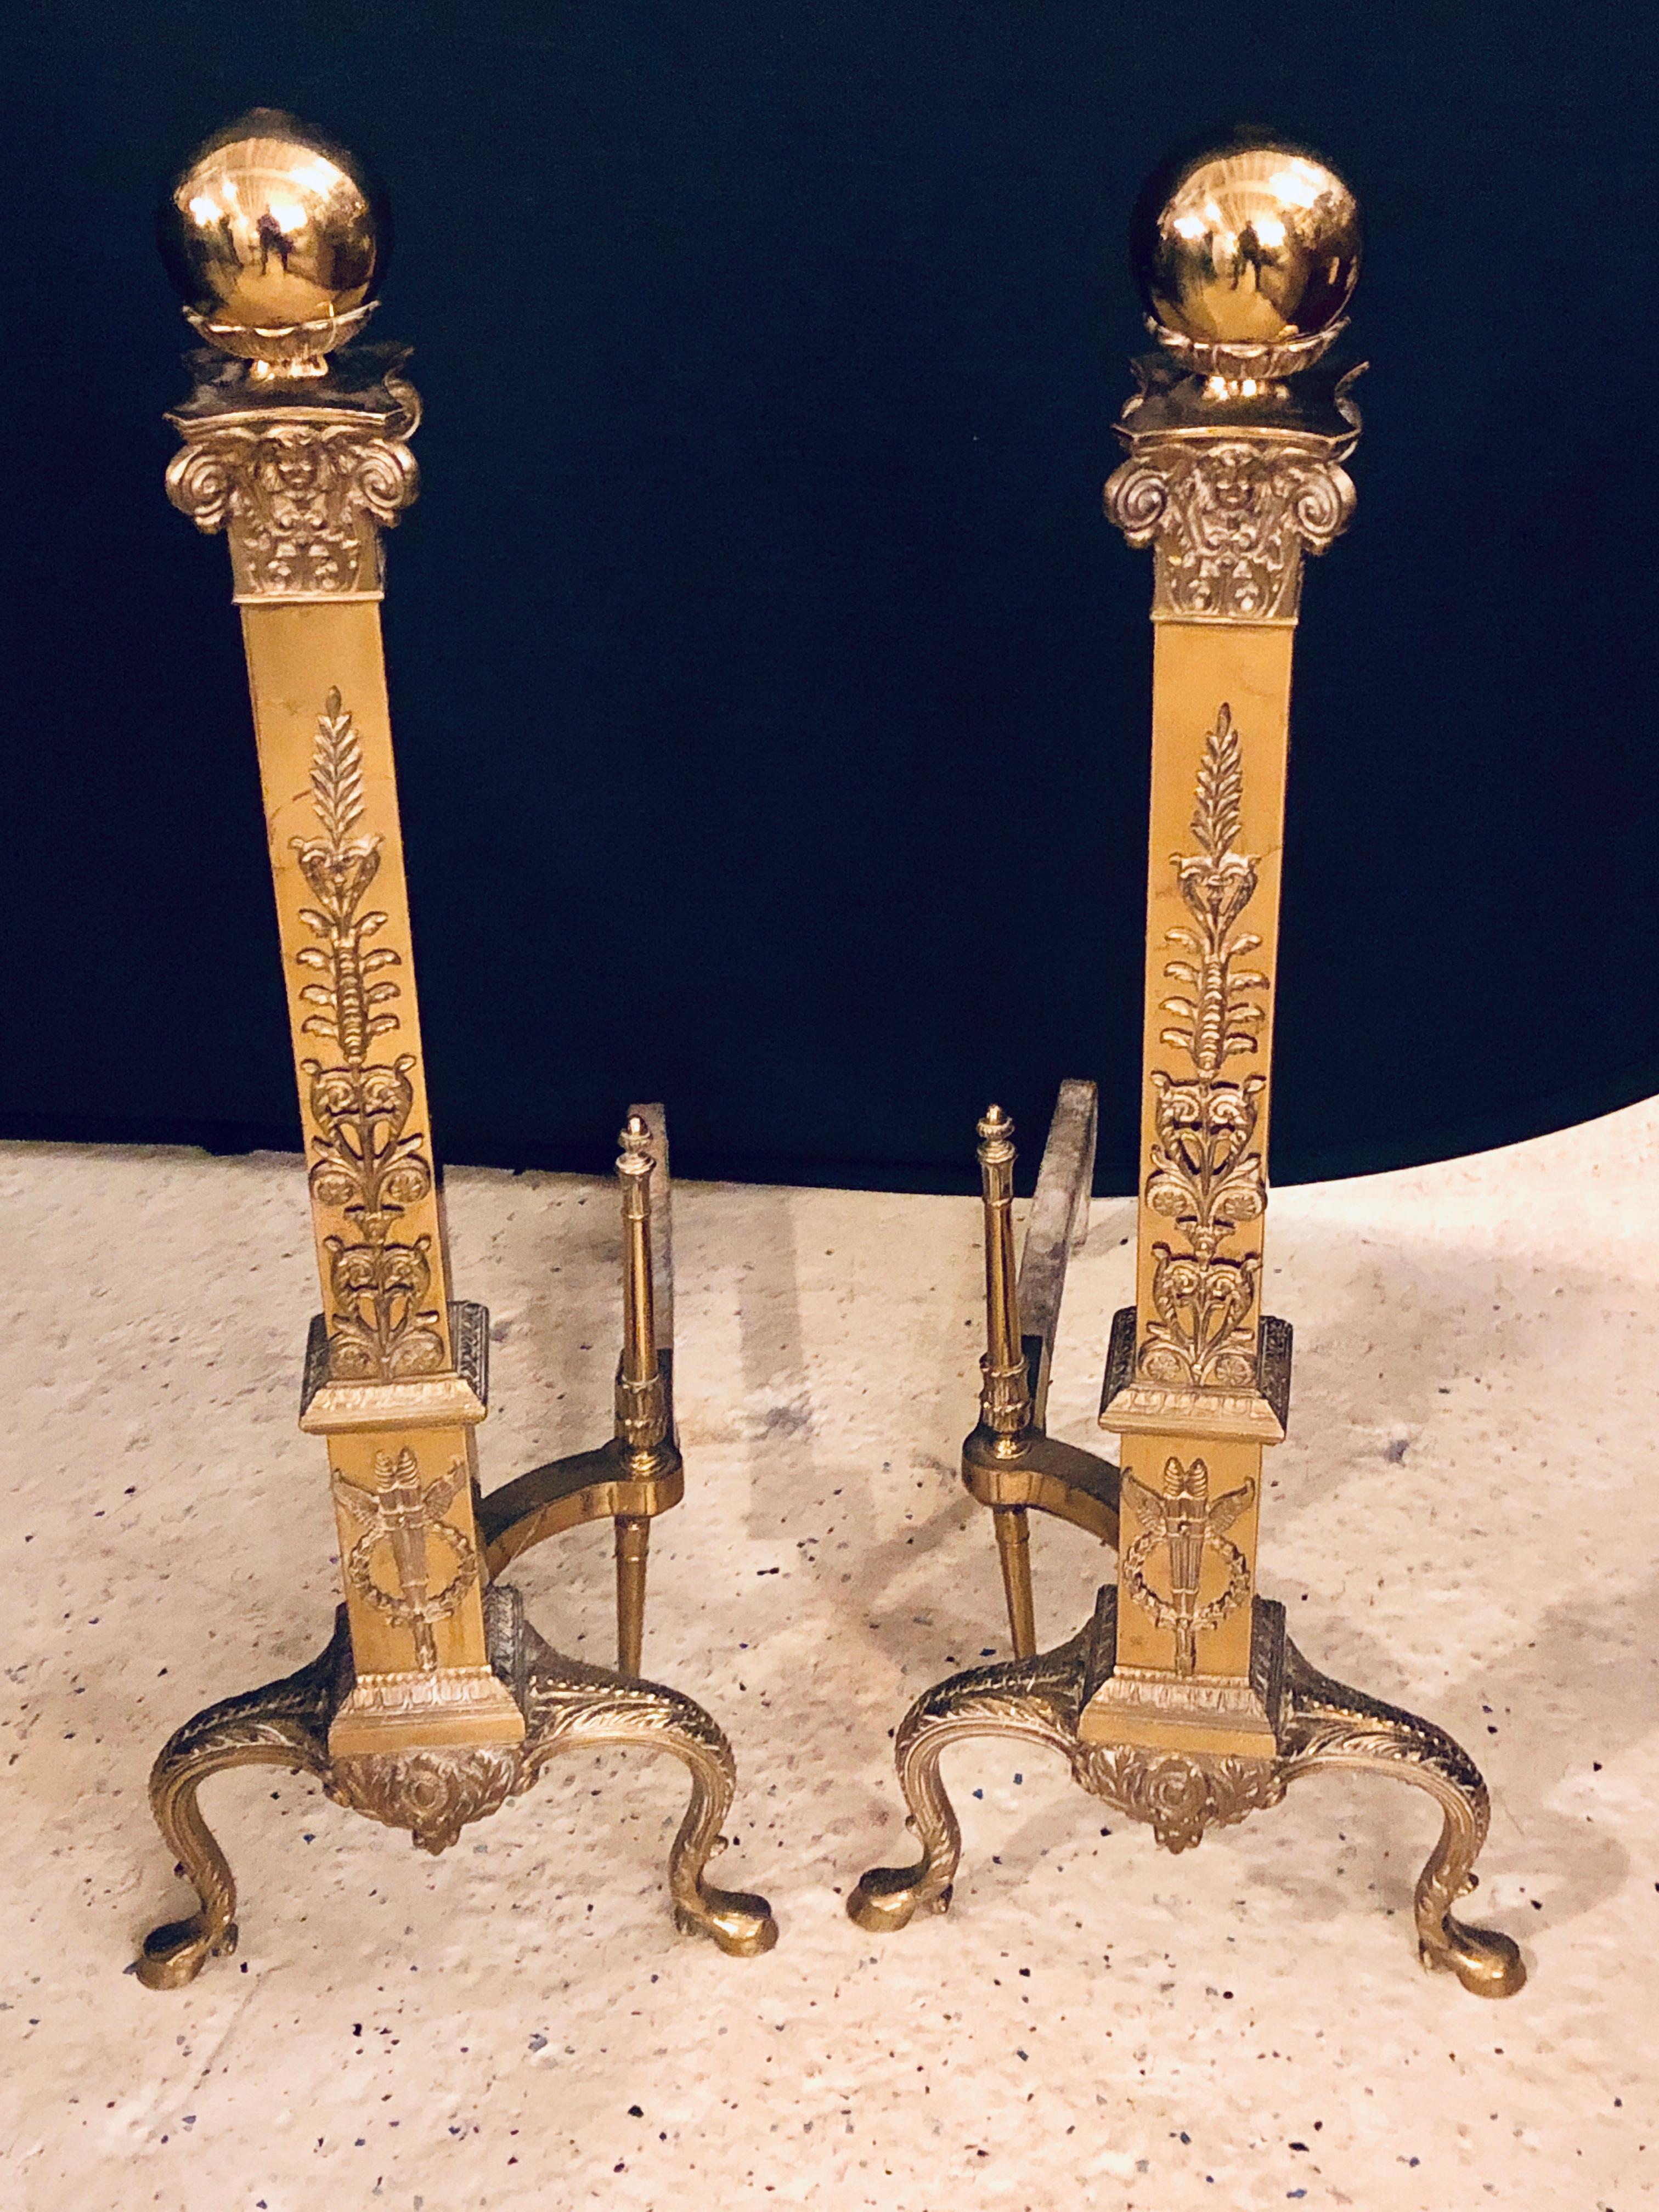 A fine pair of large and impressive brass and irons in the Louis XVI style. These fine and solid andirons are simply stunning with wreath and vine decorations terminating in a large ball on top of a chased column.